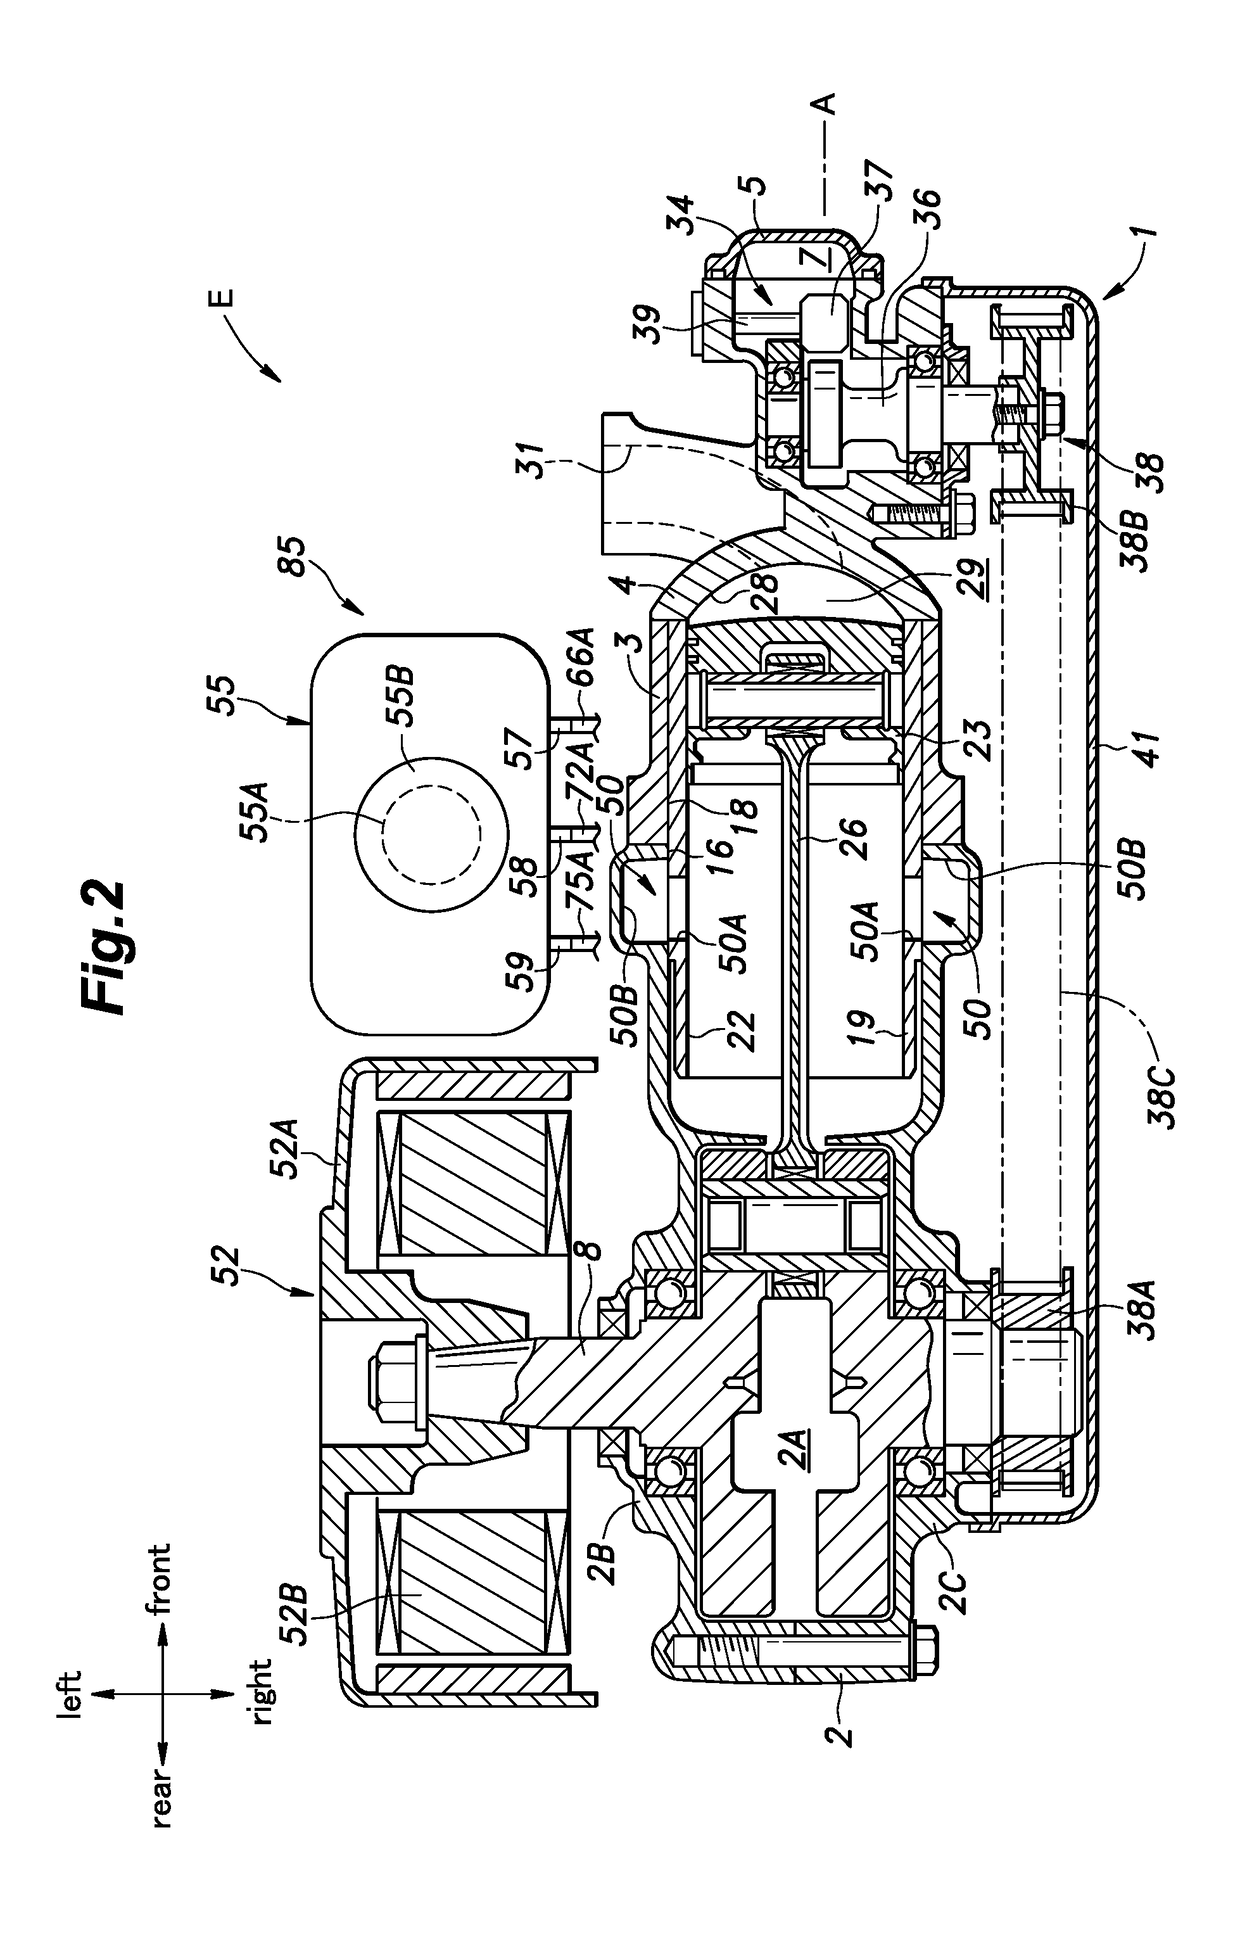 Lubrication system for internal combustion engine